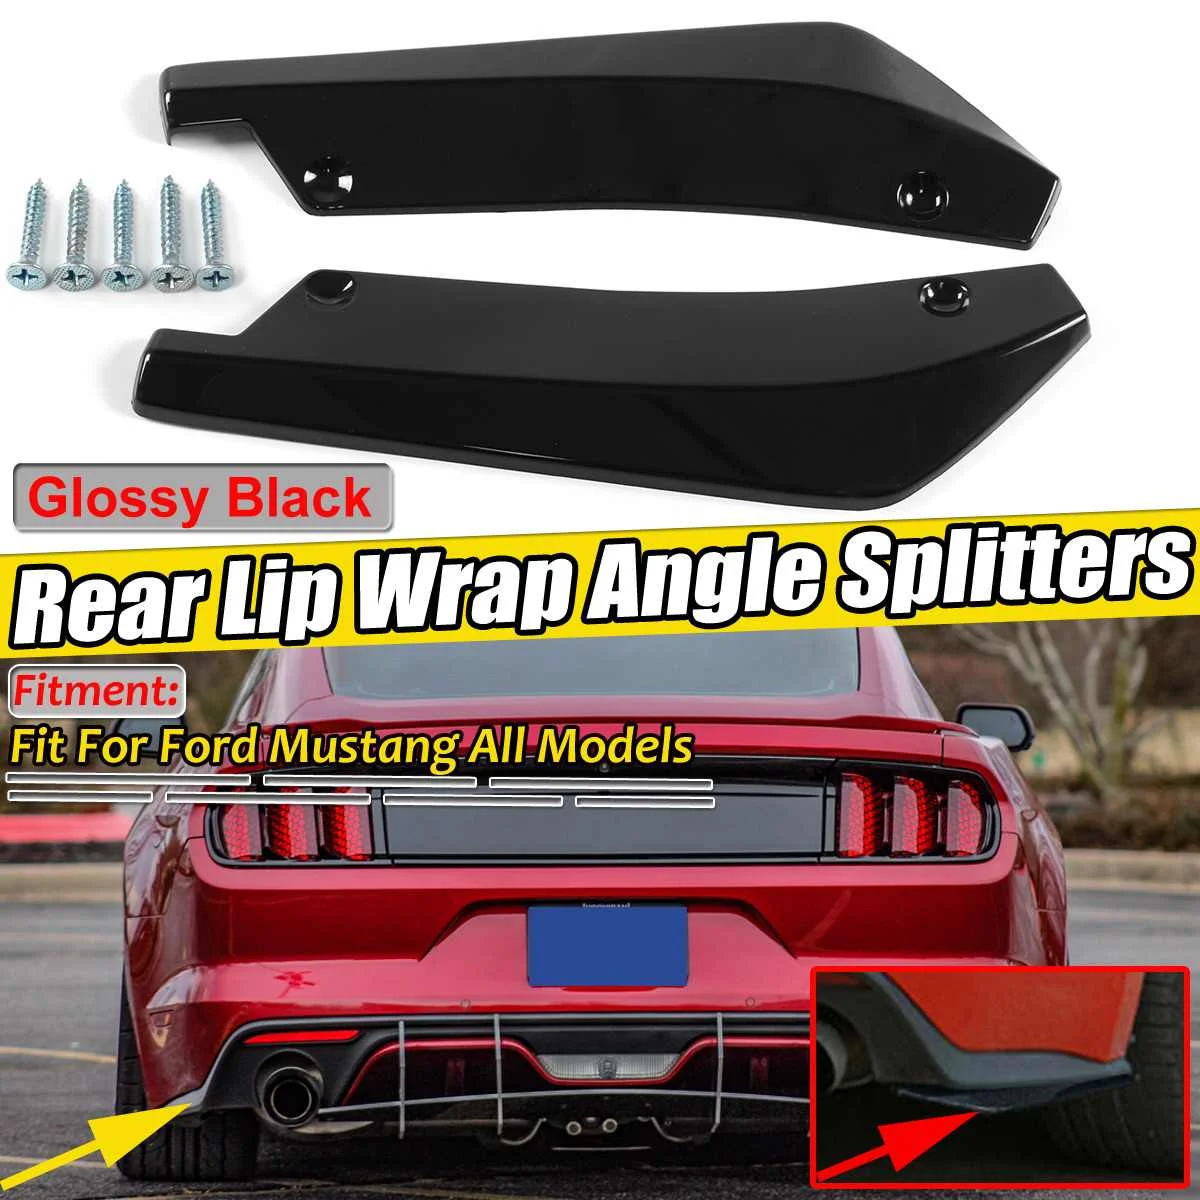 Bright Black 2pcs Universal Car Rear Bumper Diffuser Protector Lip Splitters For Ford For Fiesta MK7 19+ For Mustang For Focus